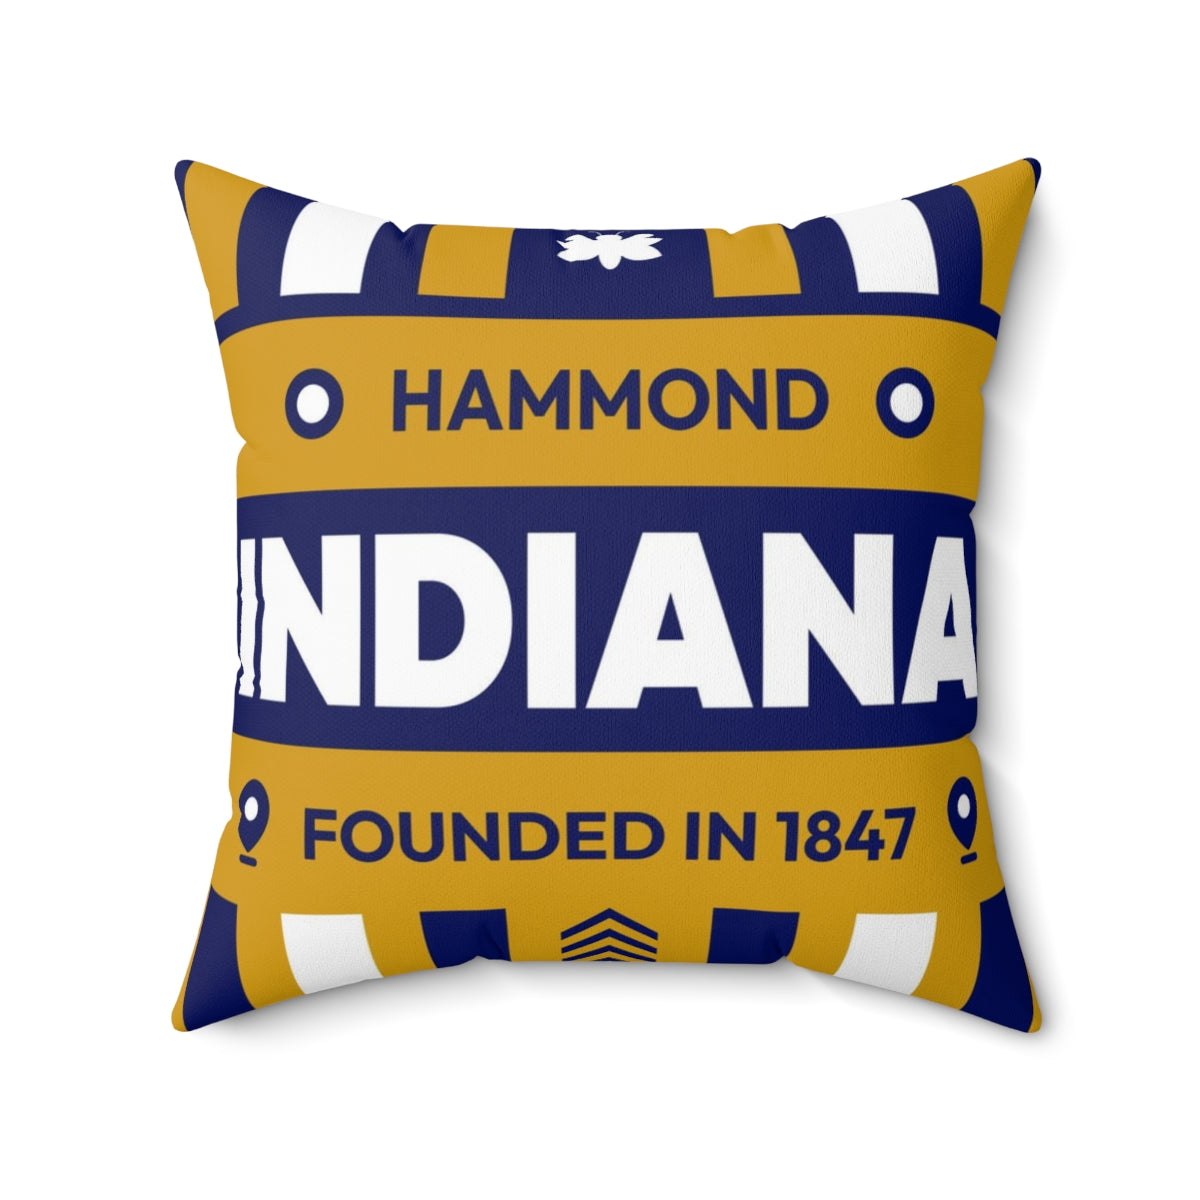 20"x20" pillow design for Hammond, Indiana Top view.